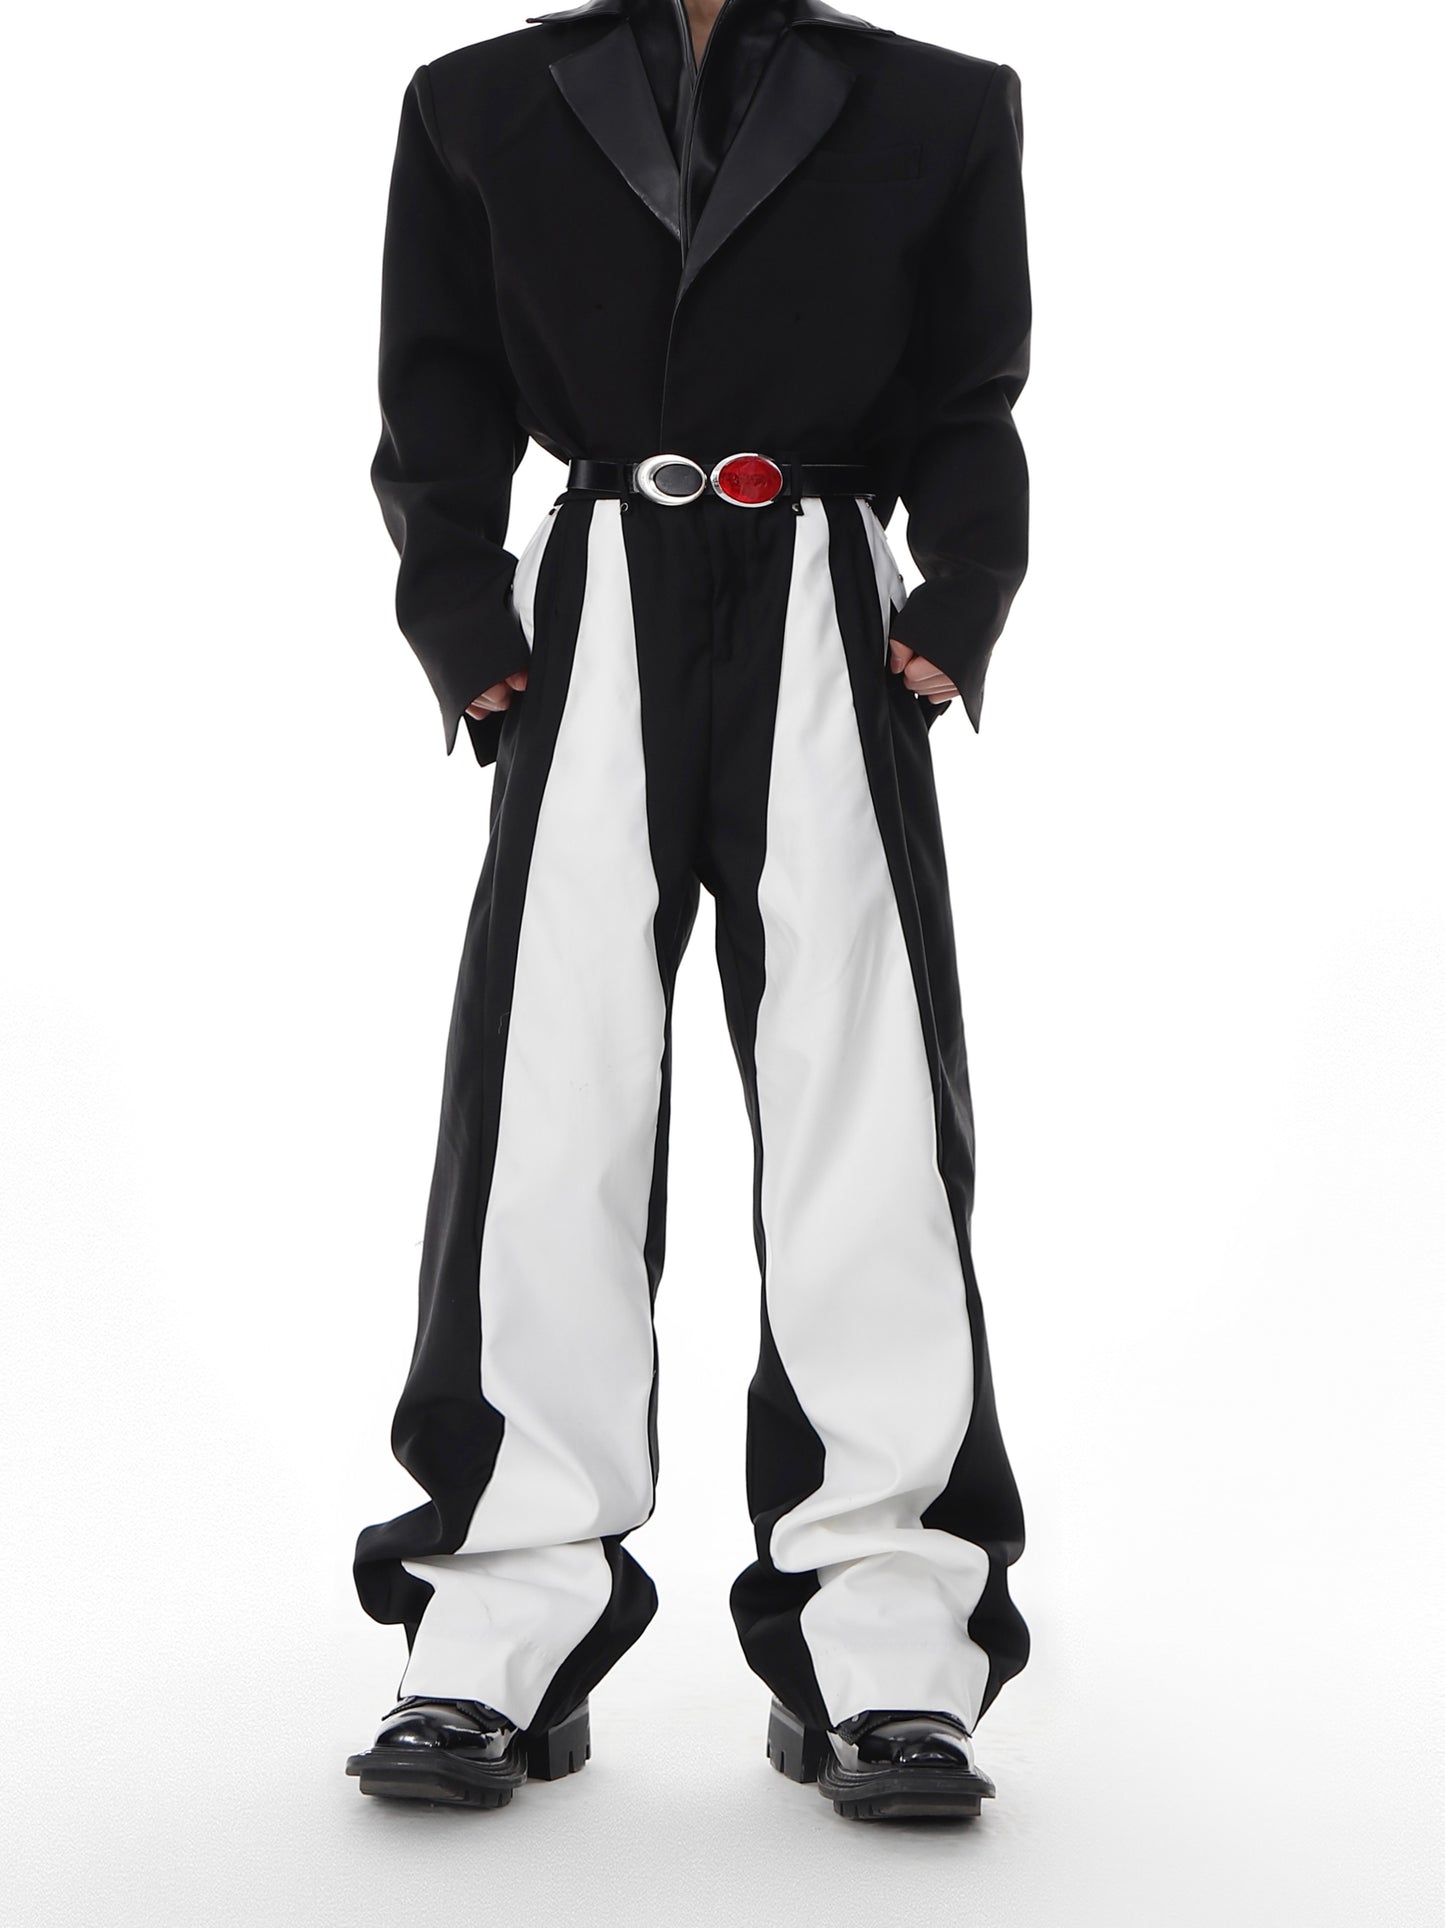 UNISEX Deconstructed Black and White Contrast Pants [H165]